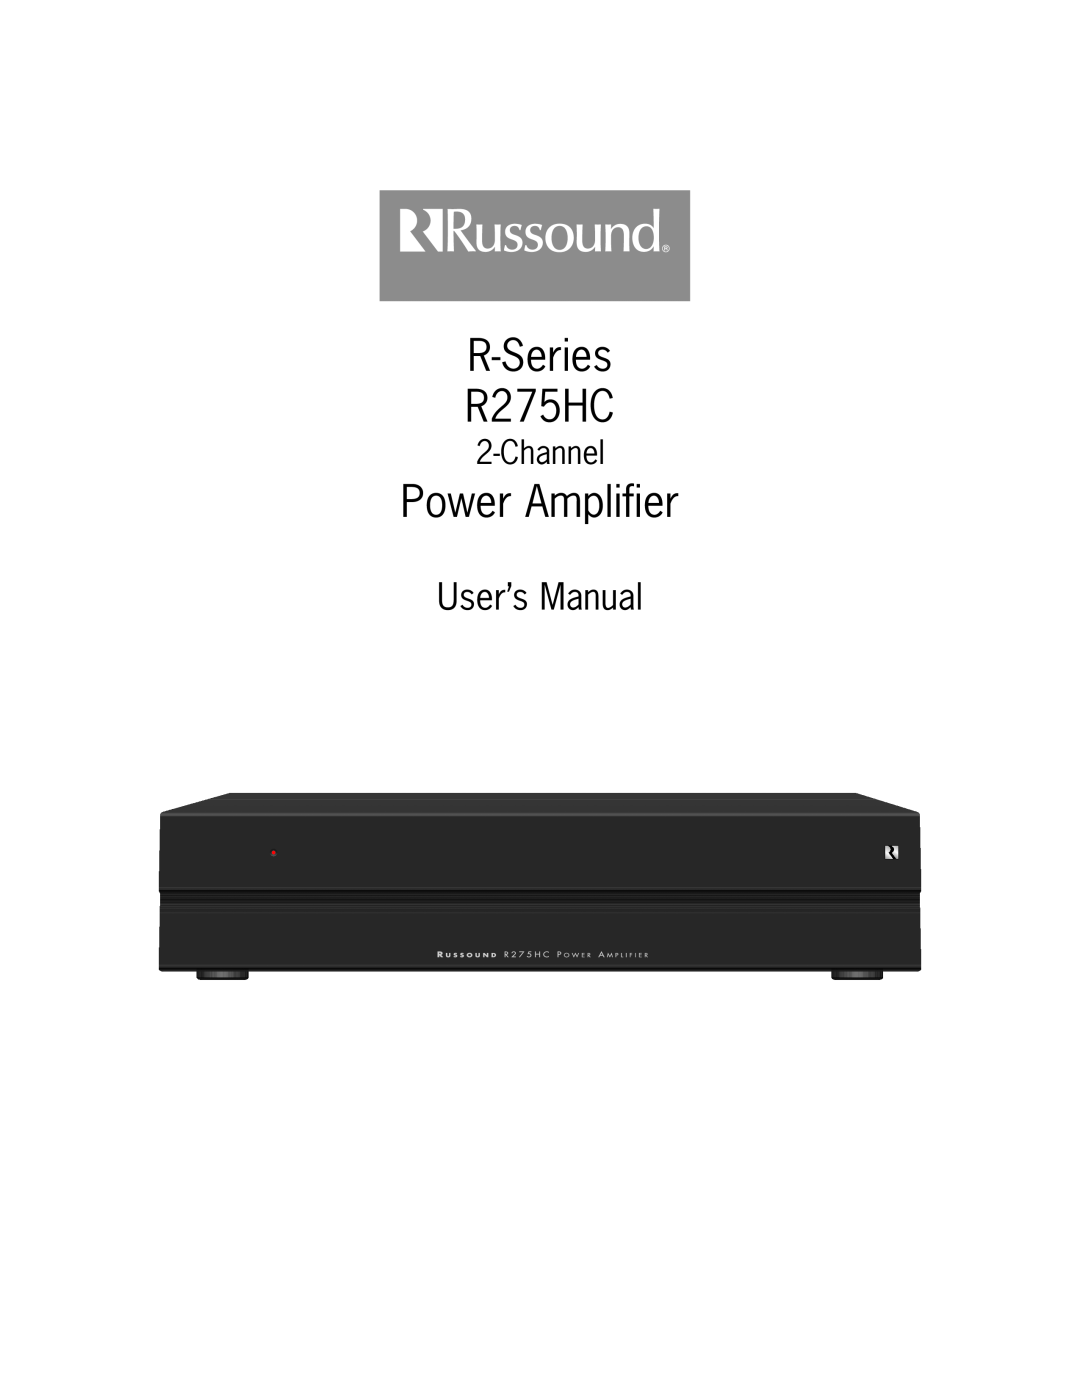 Russound user manual R-Series R275HC, Power Amplifier, User’s Manual, Channel 